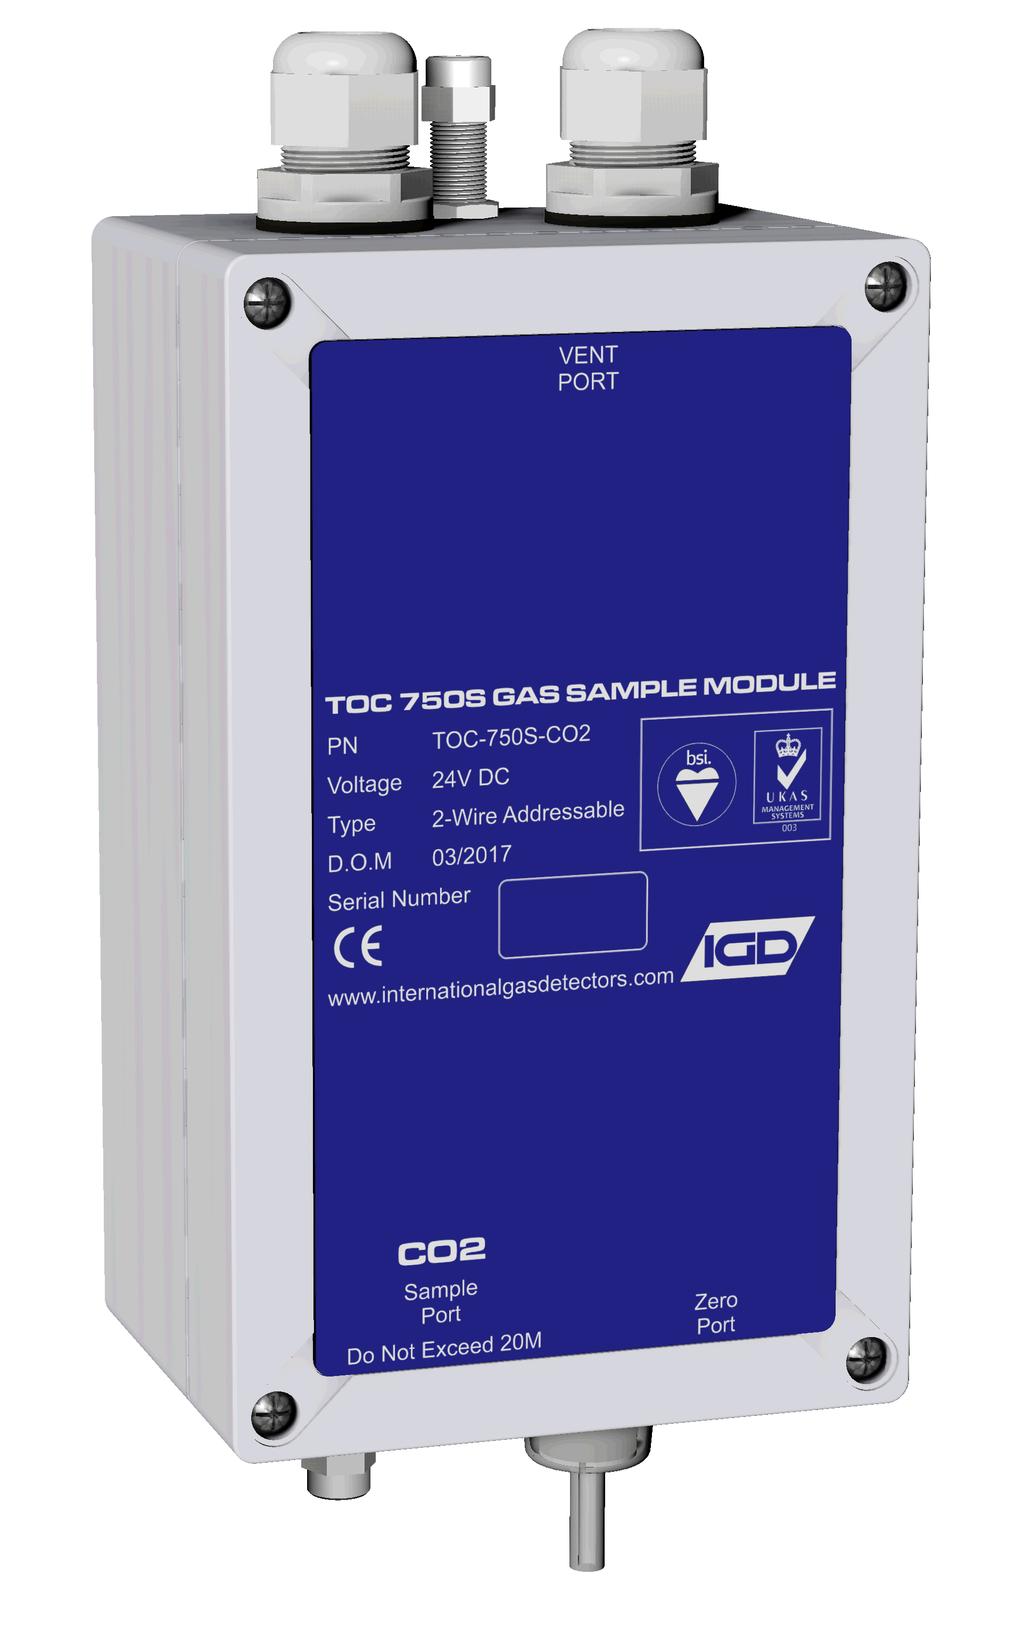 Cryogenic Gas Detection Specialised Sampling Gas Detectors As well as manufacturing diffusion based fixed gas detectors, IGD also produce a range of sampling gas detectors.